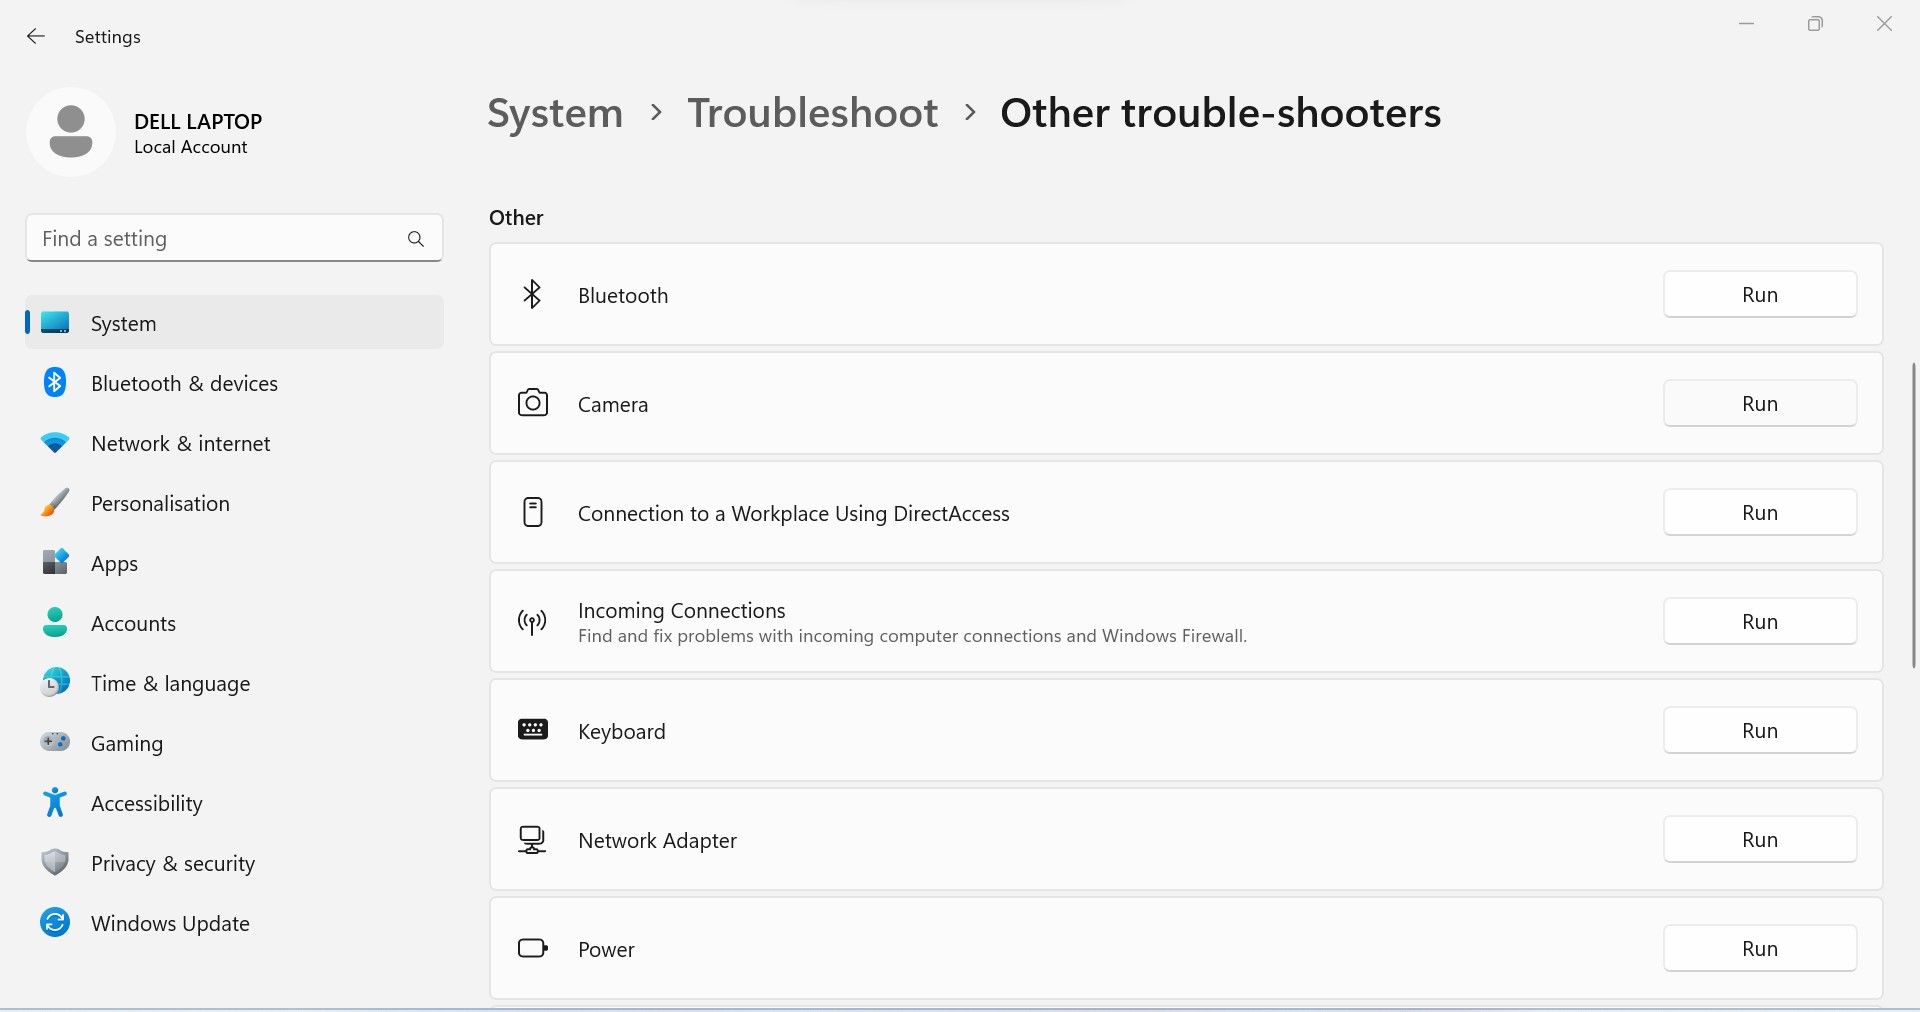 Clicking on the Run Button Next to Camera Troubleshooter in Windows Settings App